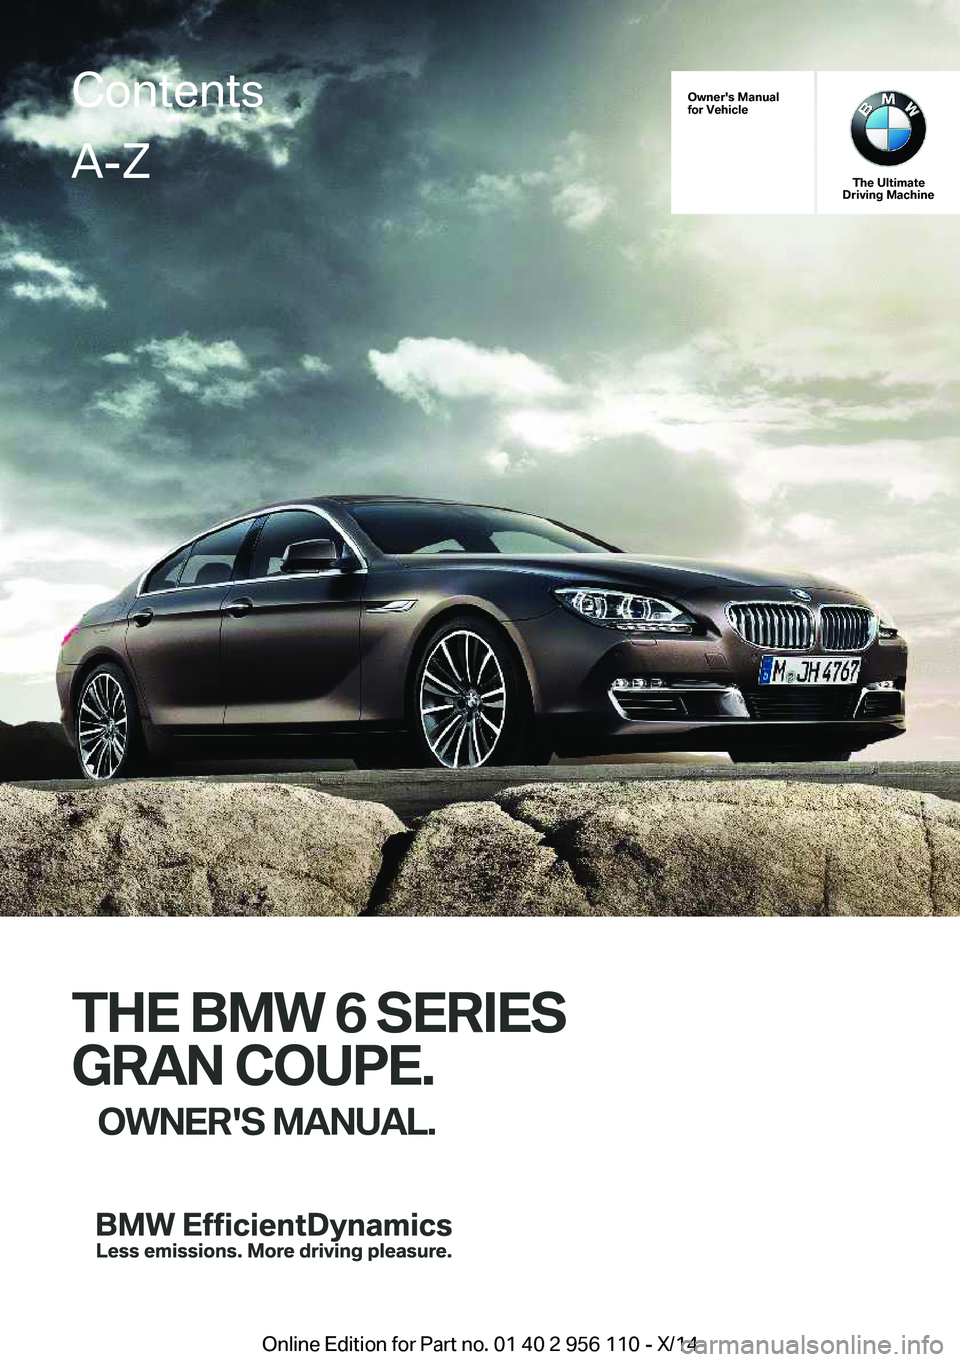 BMW 640I XDRIVE GRAN COUPE 2014  Owners Manual Owner's Manual
for Vehicle
The Ultimate
Driving Machine
THE BMW 6 SERIES
GRAN COUPE. OWNER'S MANUAL.
ContentsA-Z
Online Edition for Part no. 01 40 2 956 110 - X/14   